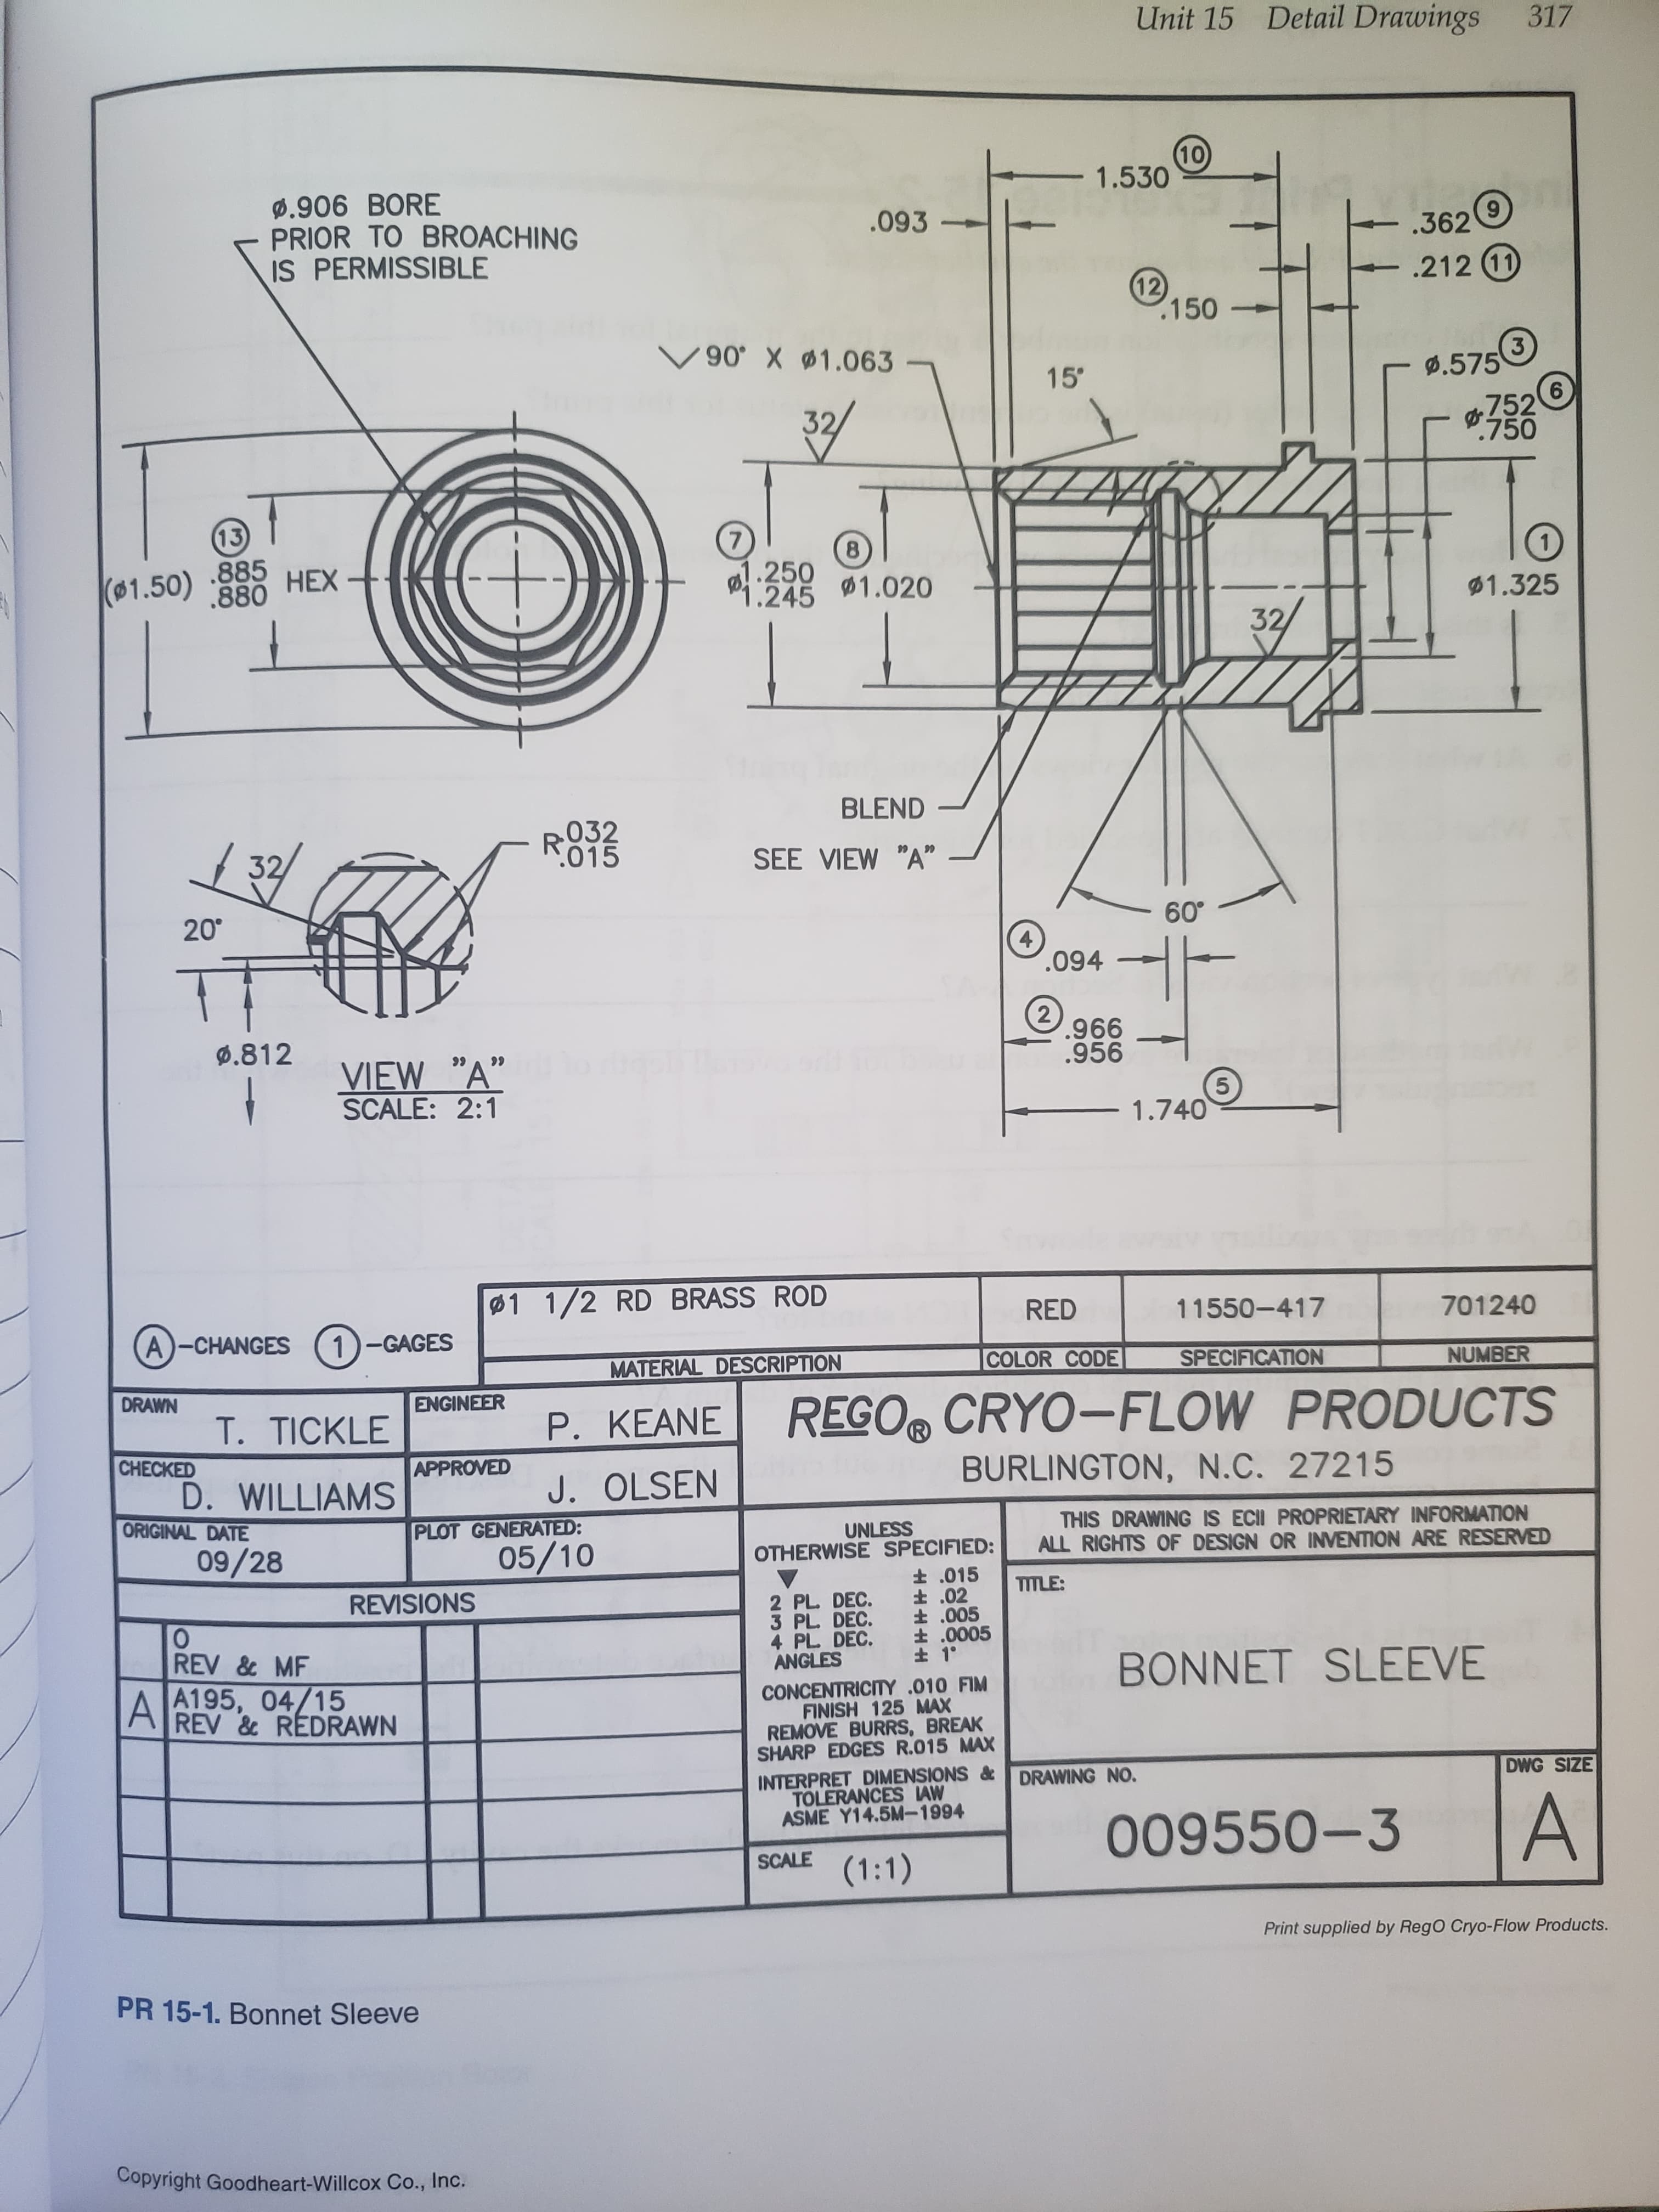 Detail Drawings
Unit 15
317
10
1.530
Ø.906 BORE
PRIOR TO BROACHING
IS PERMISSIBLE
.093
.362
212 (11
12
.150
90 X 1.063
3
ø.575
6
15
32/
752
.750
13
7
8
1.250
1.245
.885
.880
НЕХ
(61.50)
1.020
$1.325
32/
BLEND
032
015
SEE VIEW "A"
20°
60
4
.094
TT
2
.966
.956
.812
VIEW "A"
SCALE: 2:1
99
5
1.740
1 1/2 RD BRASS ROD
RED
11550-417
701240
A)-CHANGES
1-GAGES
COLOR CODE
MATERIAL DESCRIPTION
SPECIFICATION
NUMBER
DRAWN
ENGINEER
REGO® CRYO-FLOW PRODUCTS
T. TICKLE
P.KEANE
CHECKED
APPROVED
BURLINGTON, N.C. 27215
D. WILLIAMS
J. OLSEN
ORIGINAL DATE
PLOT GENERATED:
THIS DRAWING IS ECII PROPRIETARY INFORMATION
ALL RIGHTS OF DESIGN OR INVENTION ARE RESERVED
UNLESS
OTHERWISE SPECIFIED:
05/10
09/28
t .015
t 02
t .005
t .0005
t 1
TIMLE:
REVISIONS
2 PL DEC.
3 PL DEC.
4 PL DEC.
ANGLES
REV & MF
A195, 04/15
REV&REDRAWN
BONNET SLEEVE
CONCENTRICITY .010 FIM
FINISH 125 MAX
REMOVE BURRS, BREAK
SHARP EDGES R.015 MAX
INTERPRET DIMENSIONS &
TOLERANCES AW
ASME Y14.5M-1994
DWG SIZE
DRAWING NO.
A
009550-3
SCALE
(1:1)
Print supplied by RegO Cryo-Flow Products.
PR 15-1. Bonnet Sleeve
Copyright Goodheart-Willcox Co., Inc.
